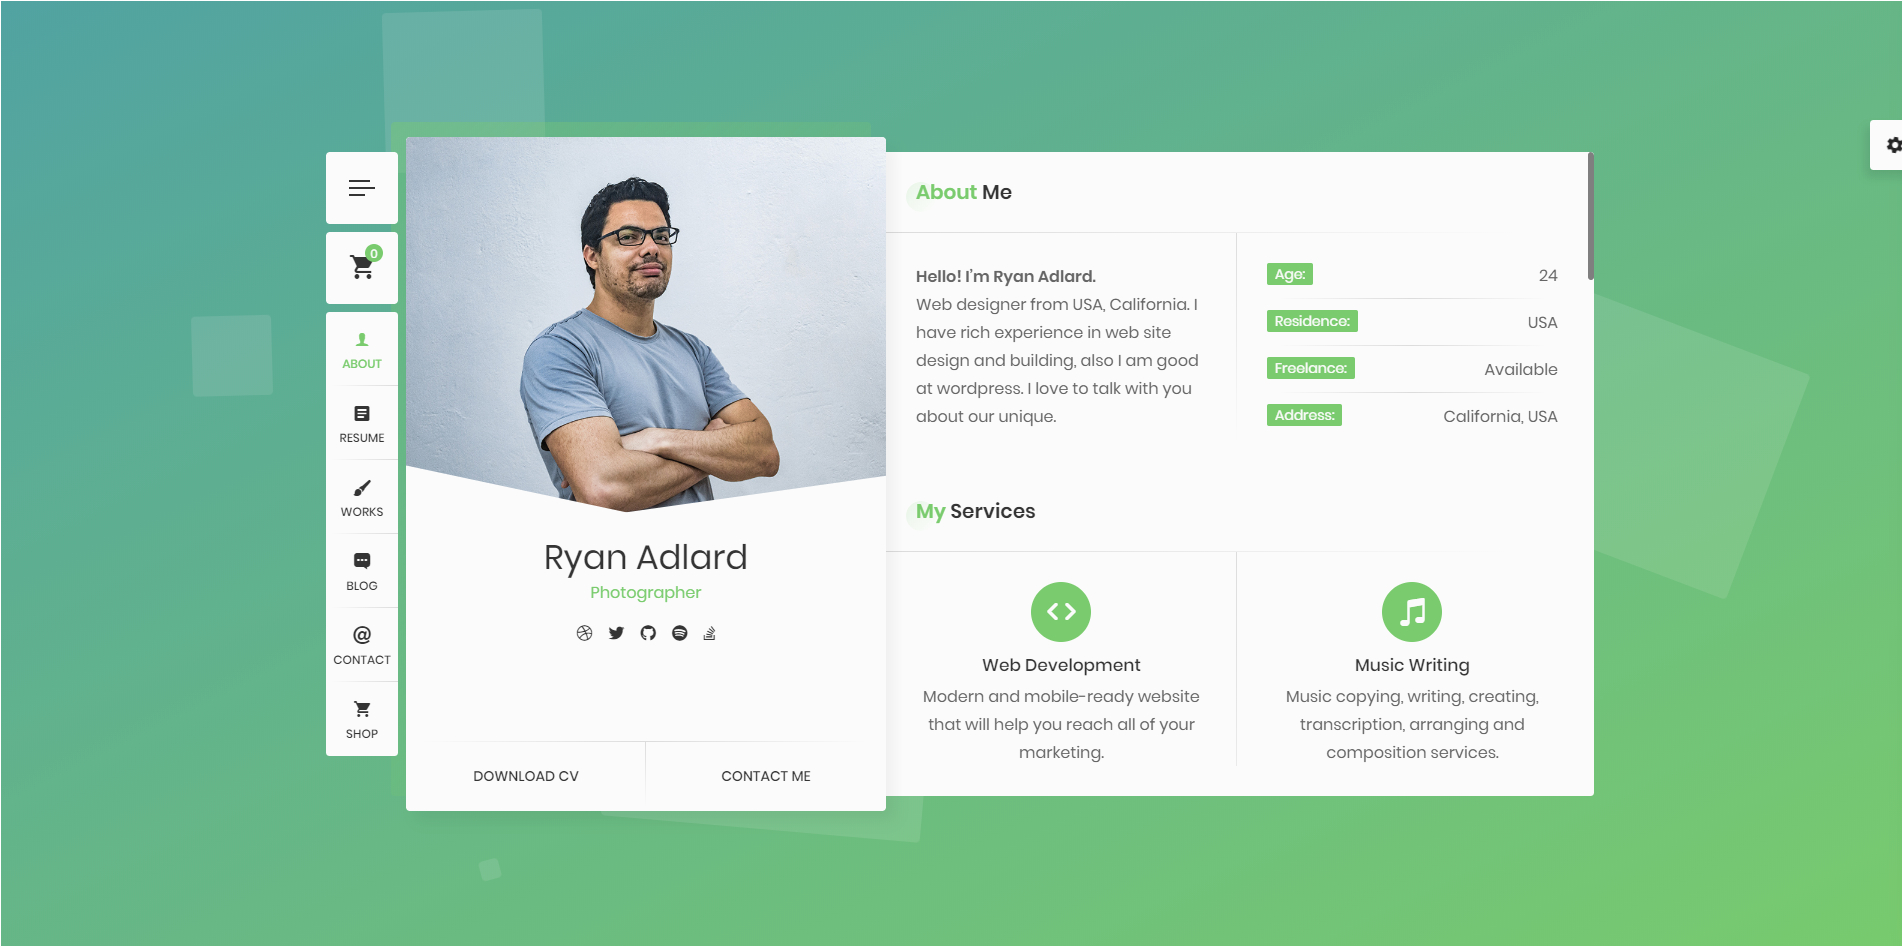 Ryan Vcard Resume Cv Template Free Download Ryan — Resume Cv Vcard theme In 2020 with Images